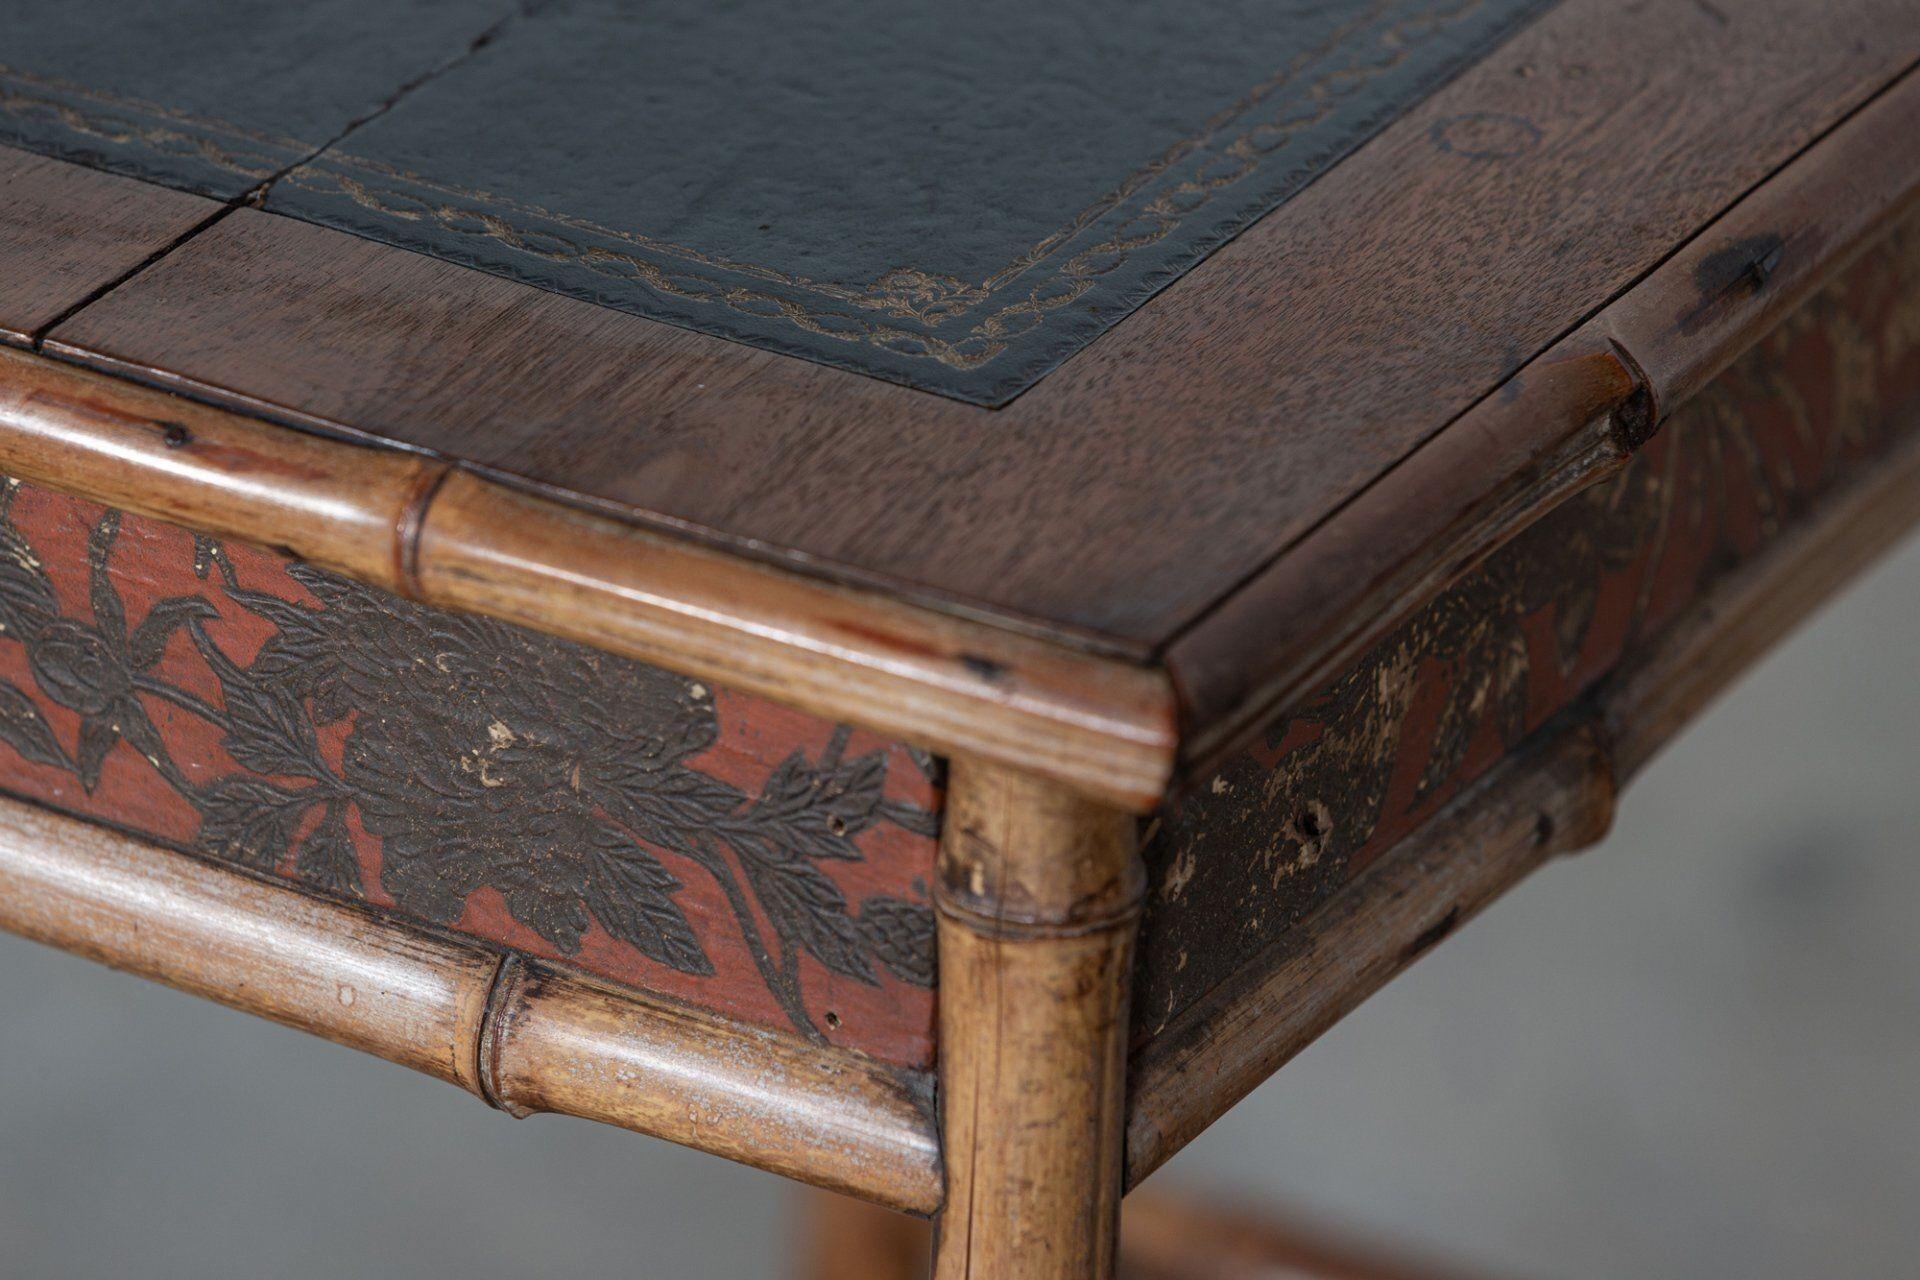 circa 1880
19th C English chinoiserie bamboo writing table - mahogany top with a tooled leather inset.
An exceptional example
sku 1238
Measures: W73 x D48 x H72 cm
Knee height 60 cm.